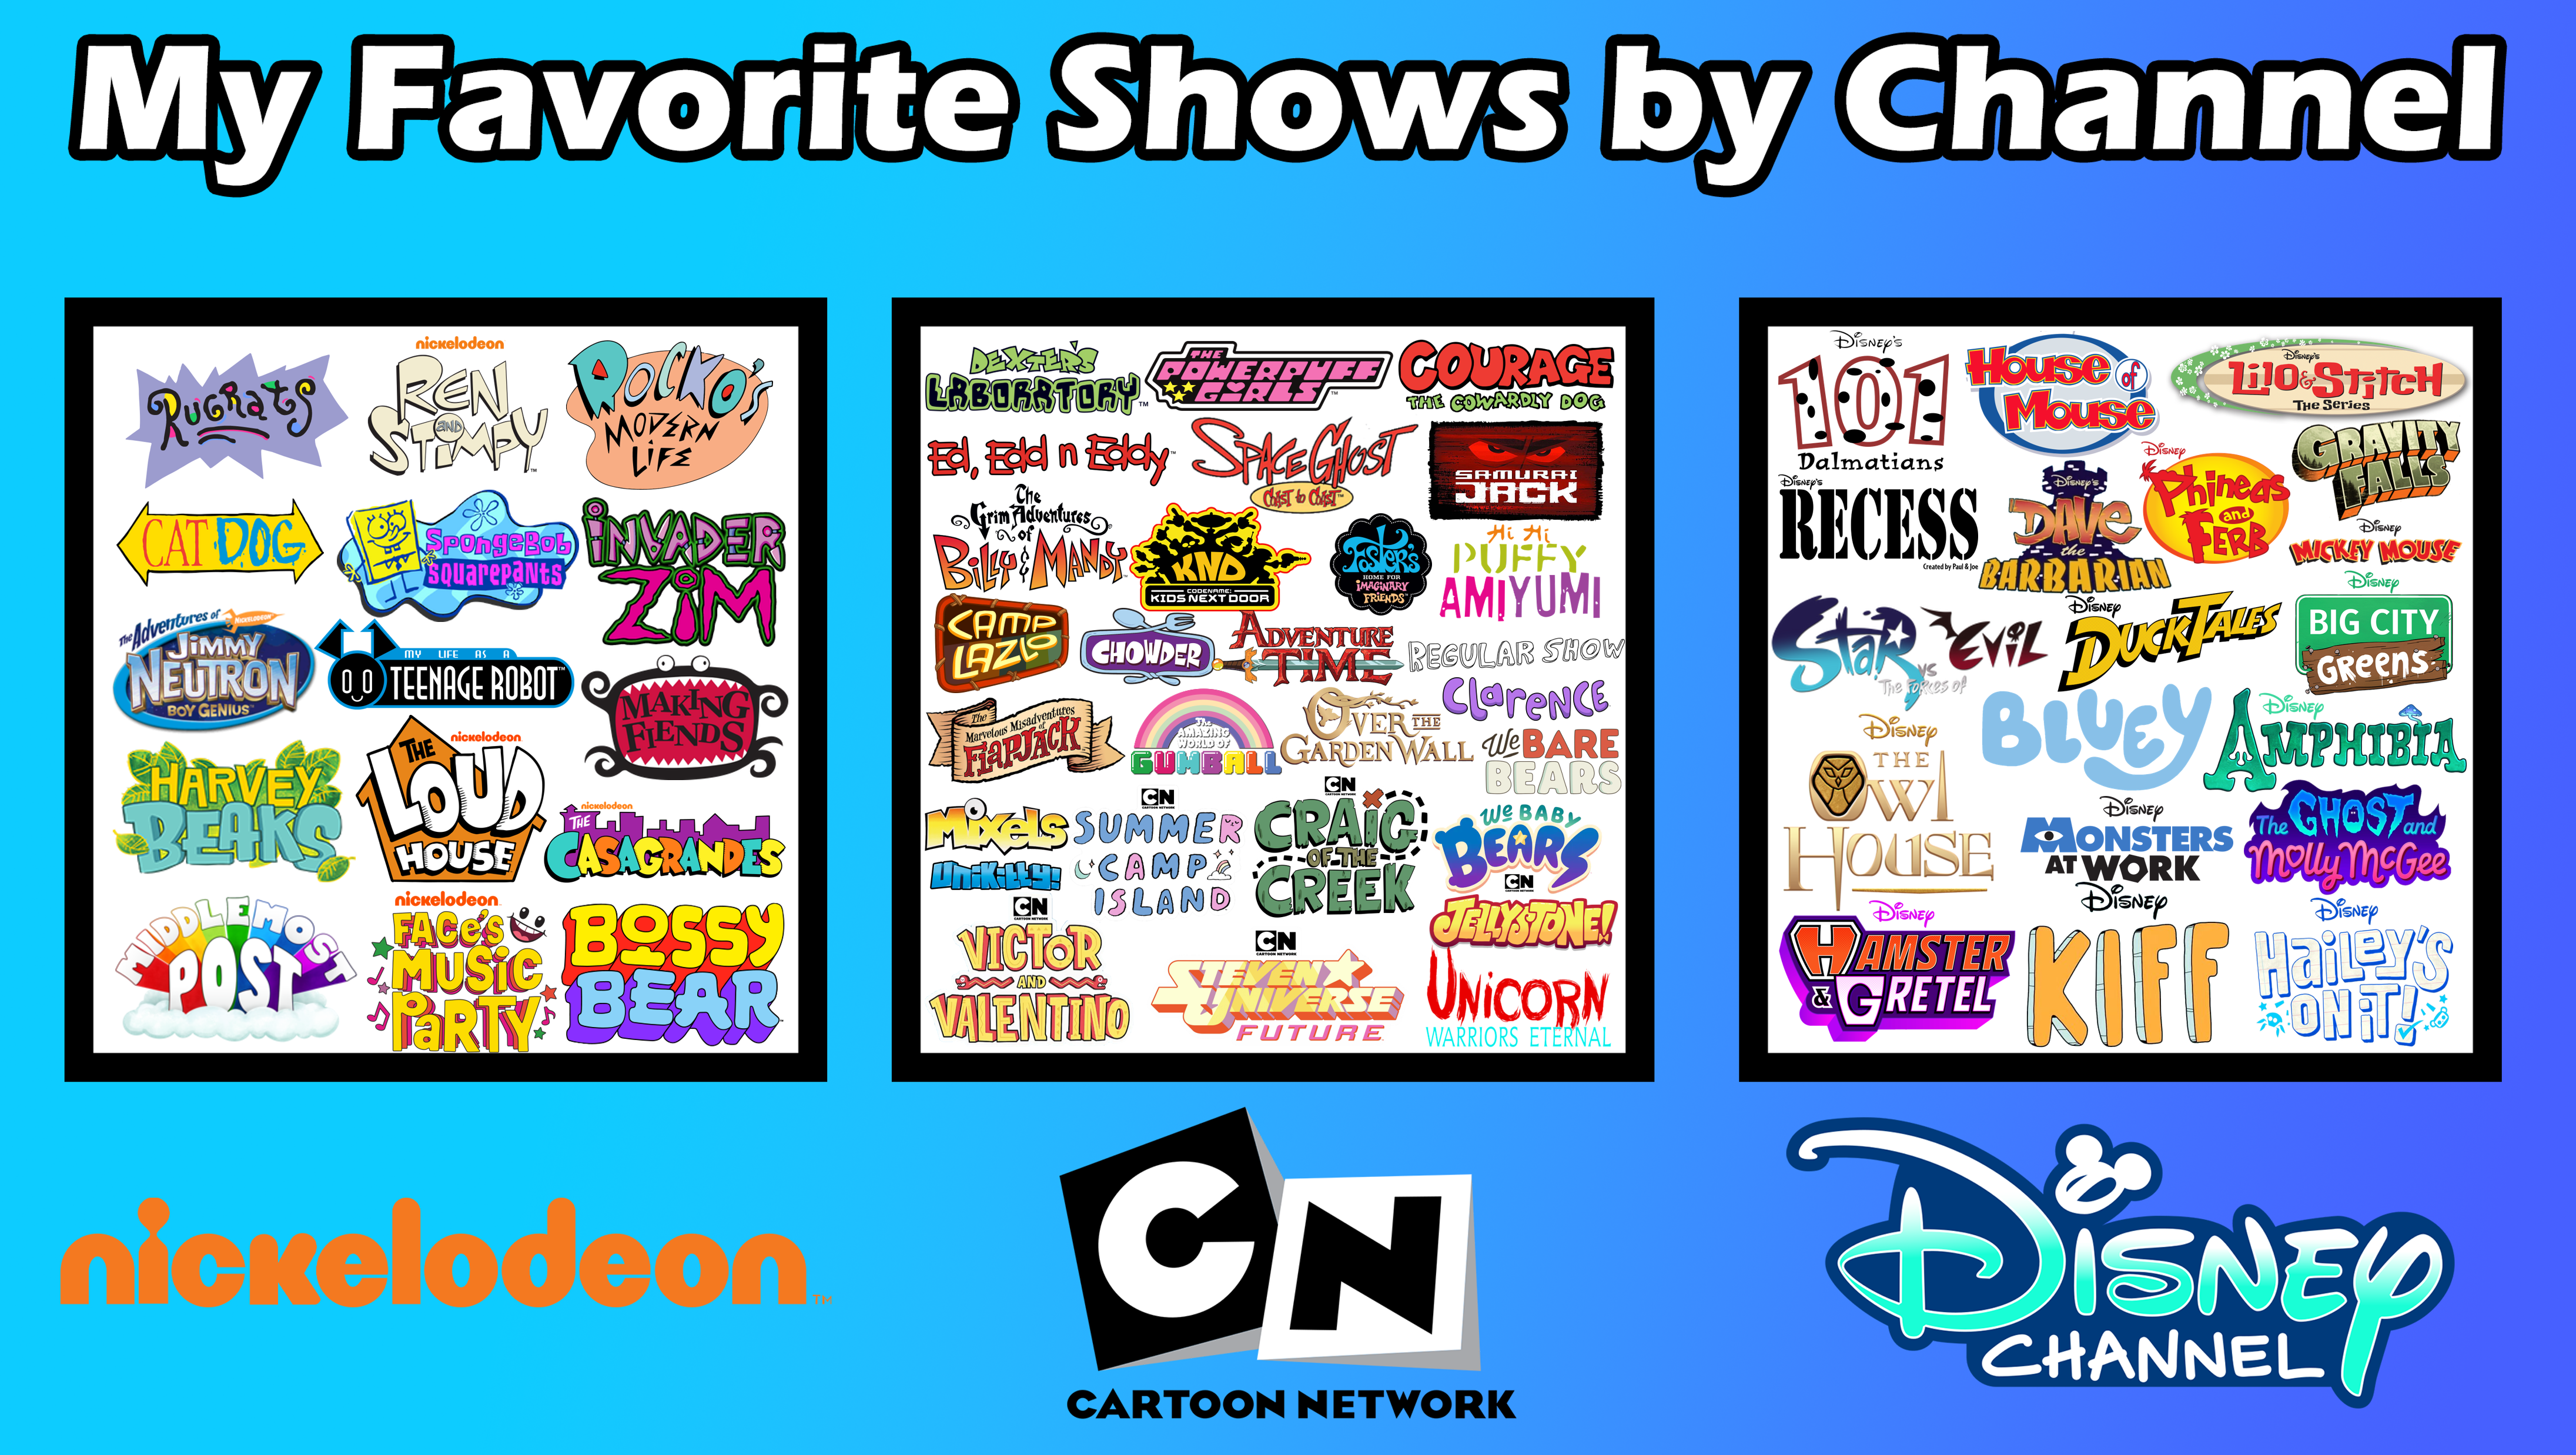 So far, what are your favorite shows this season? - Forums 